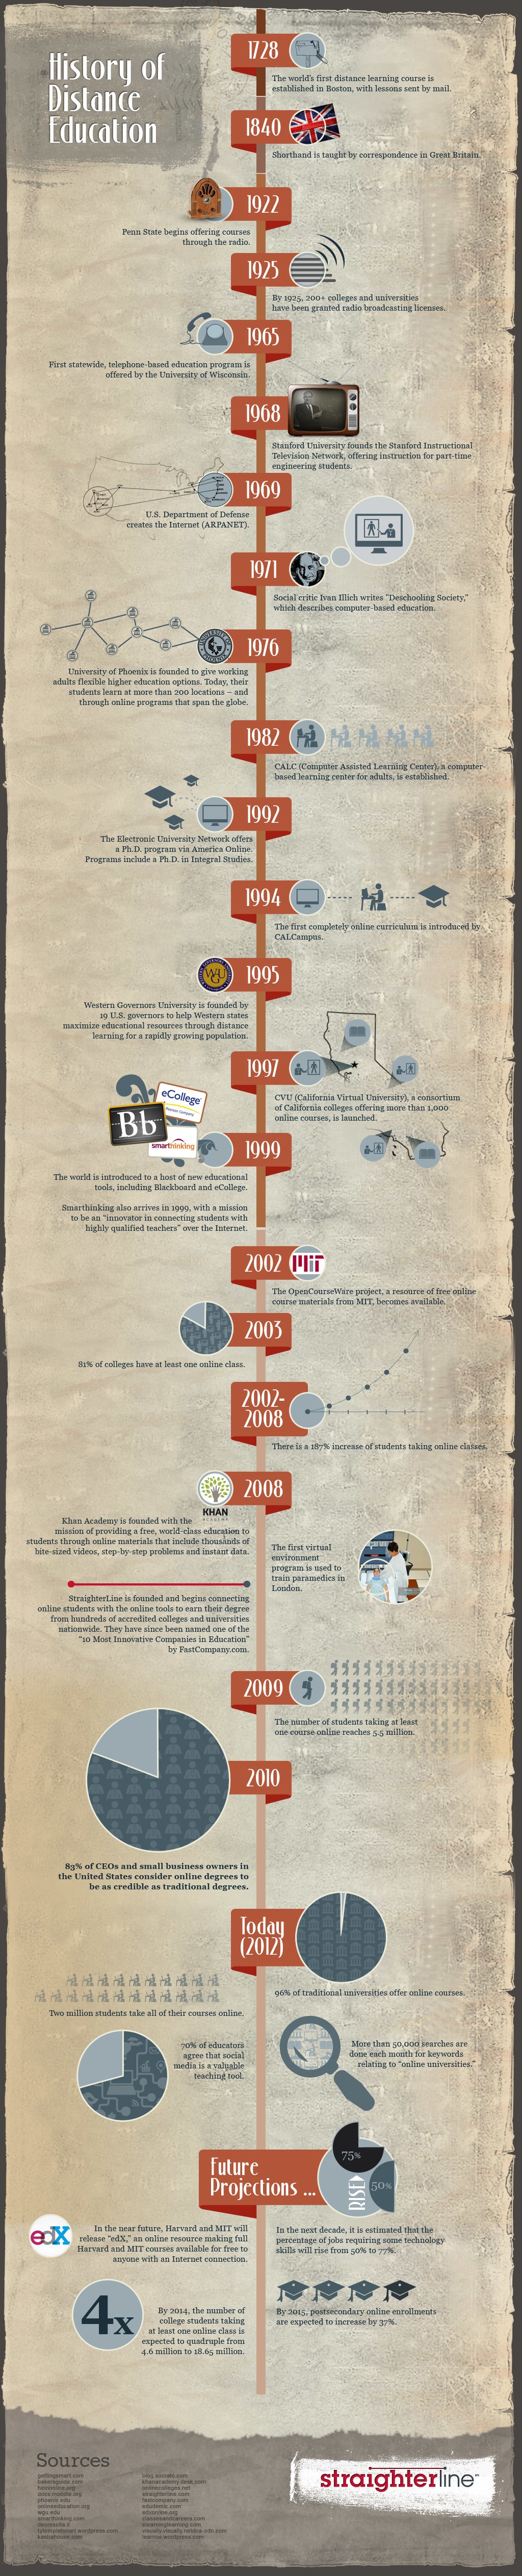 History of Distance Education Infographic